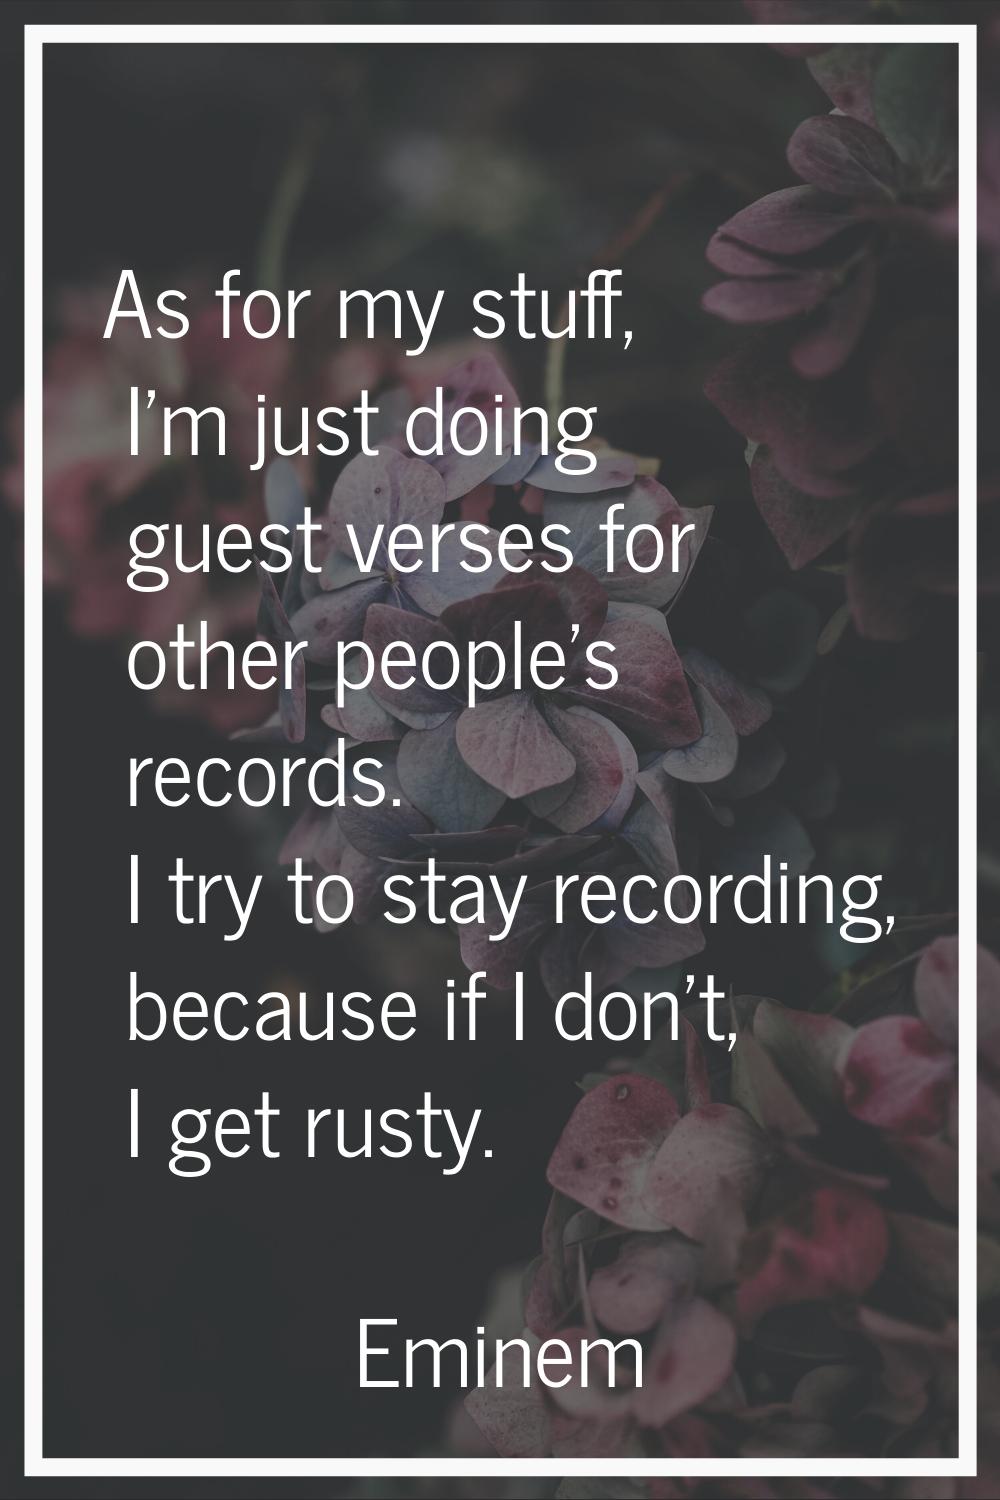 As for my stuff, I'm just doing guest verses for other people's records. I try to stay recording, b